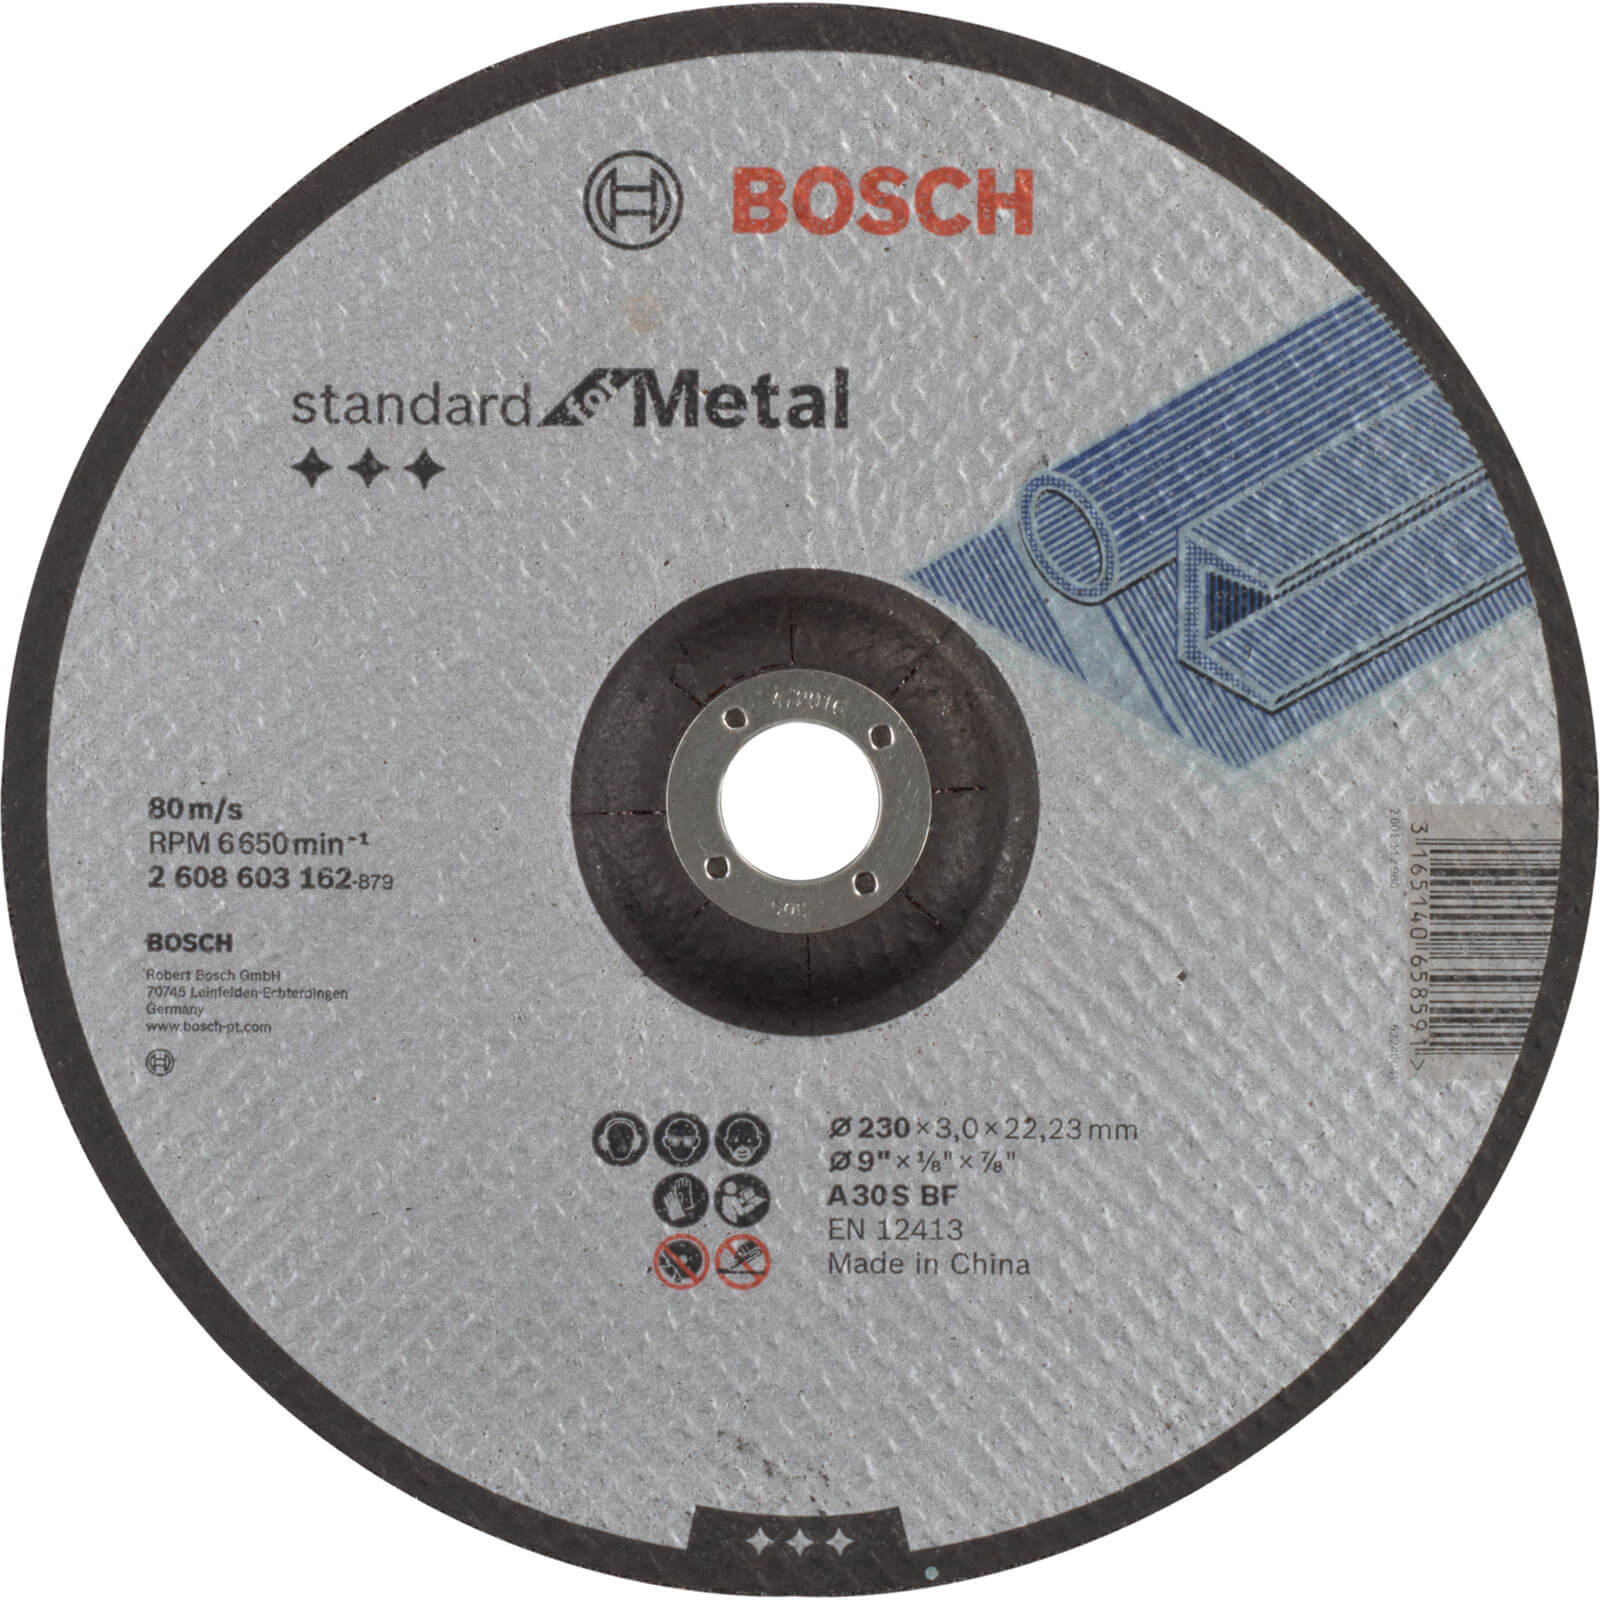 Image of Bosch Standard Depressed Centre Metal Cutting Disc 230mm 3mm 22mm